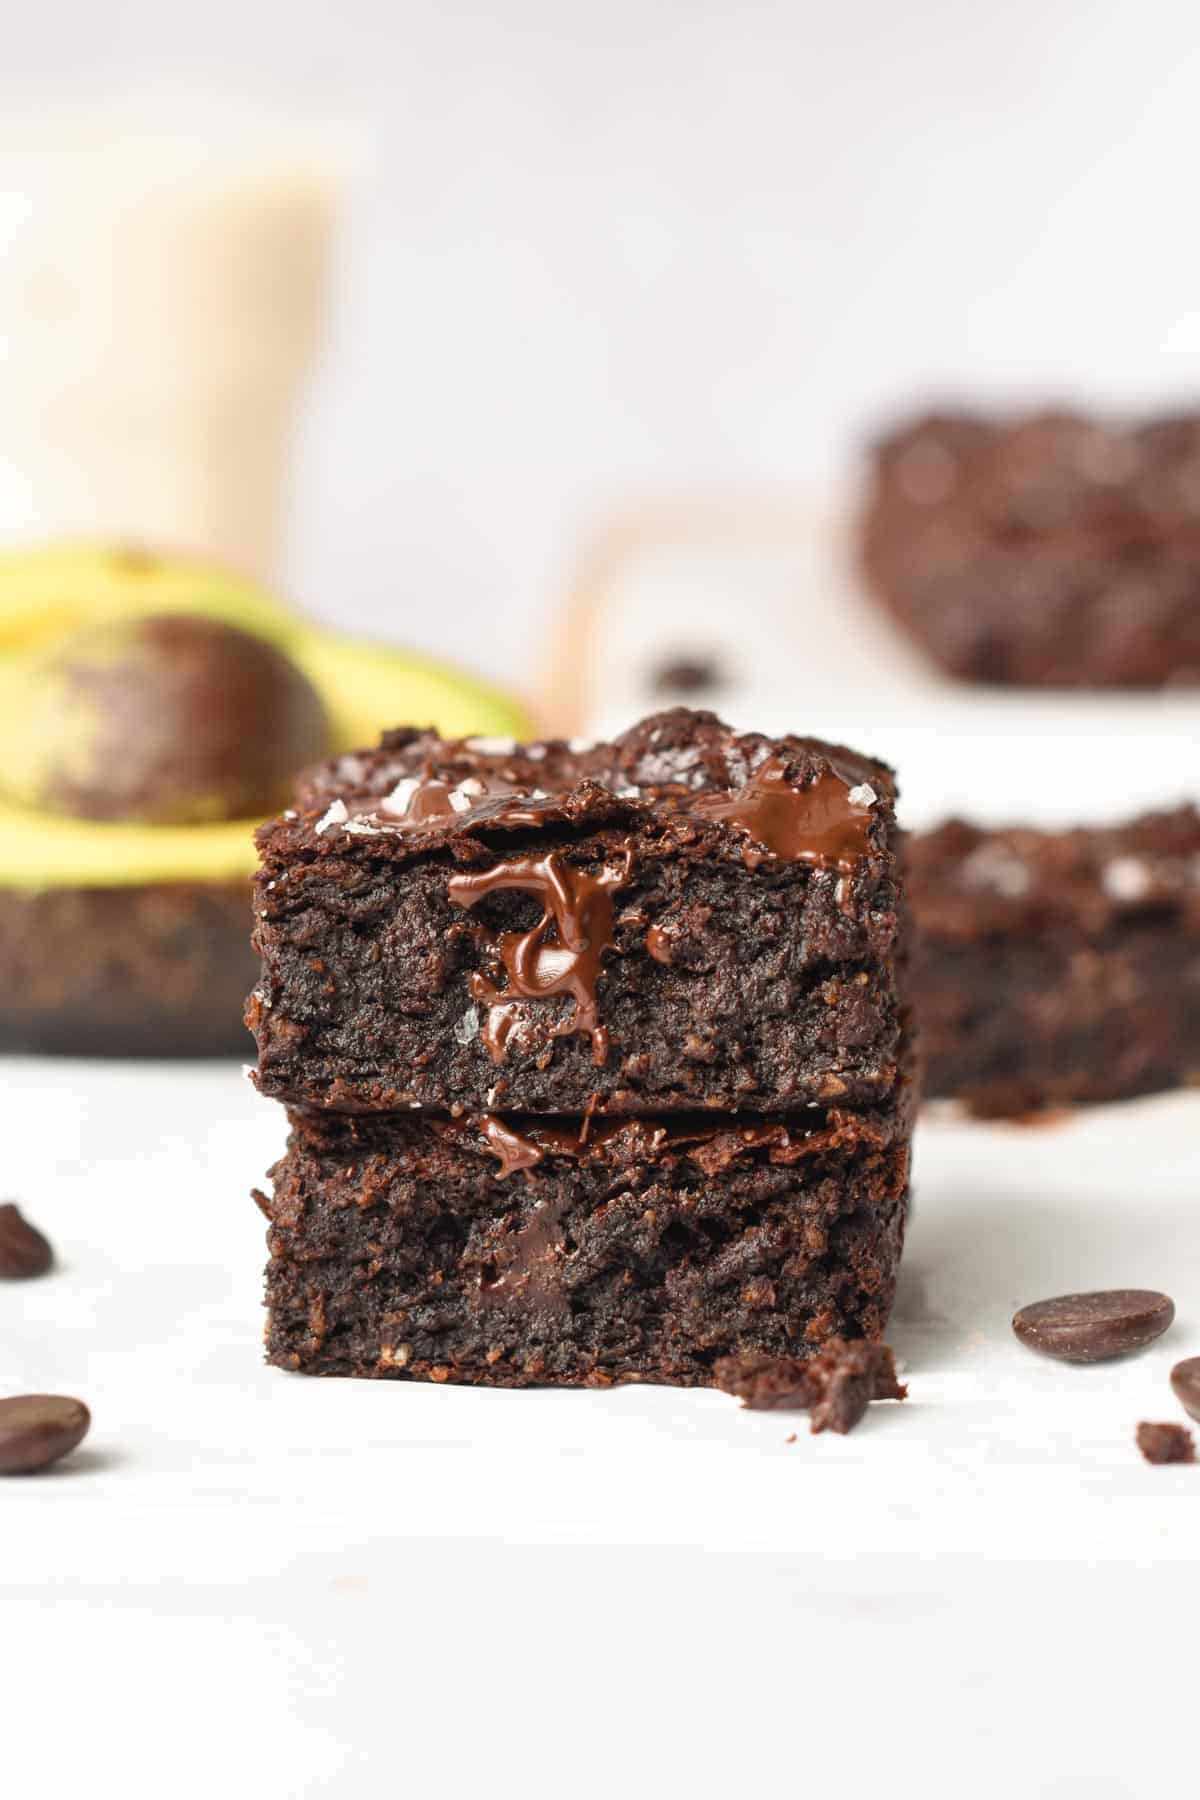 Avocado Brownies stacked in front of avocados.